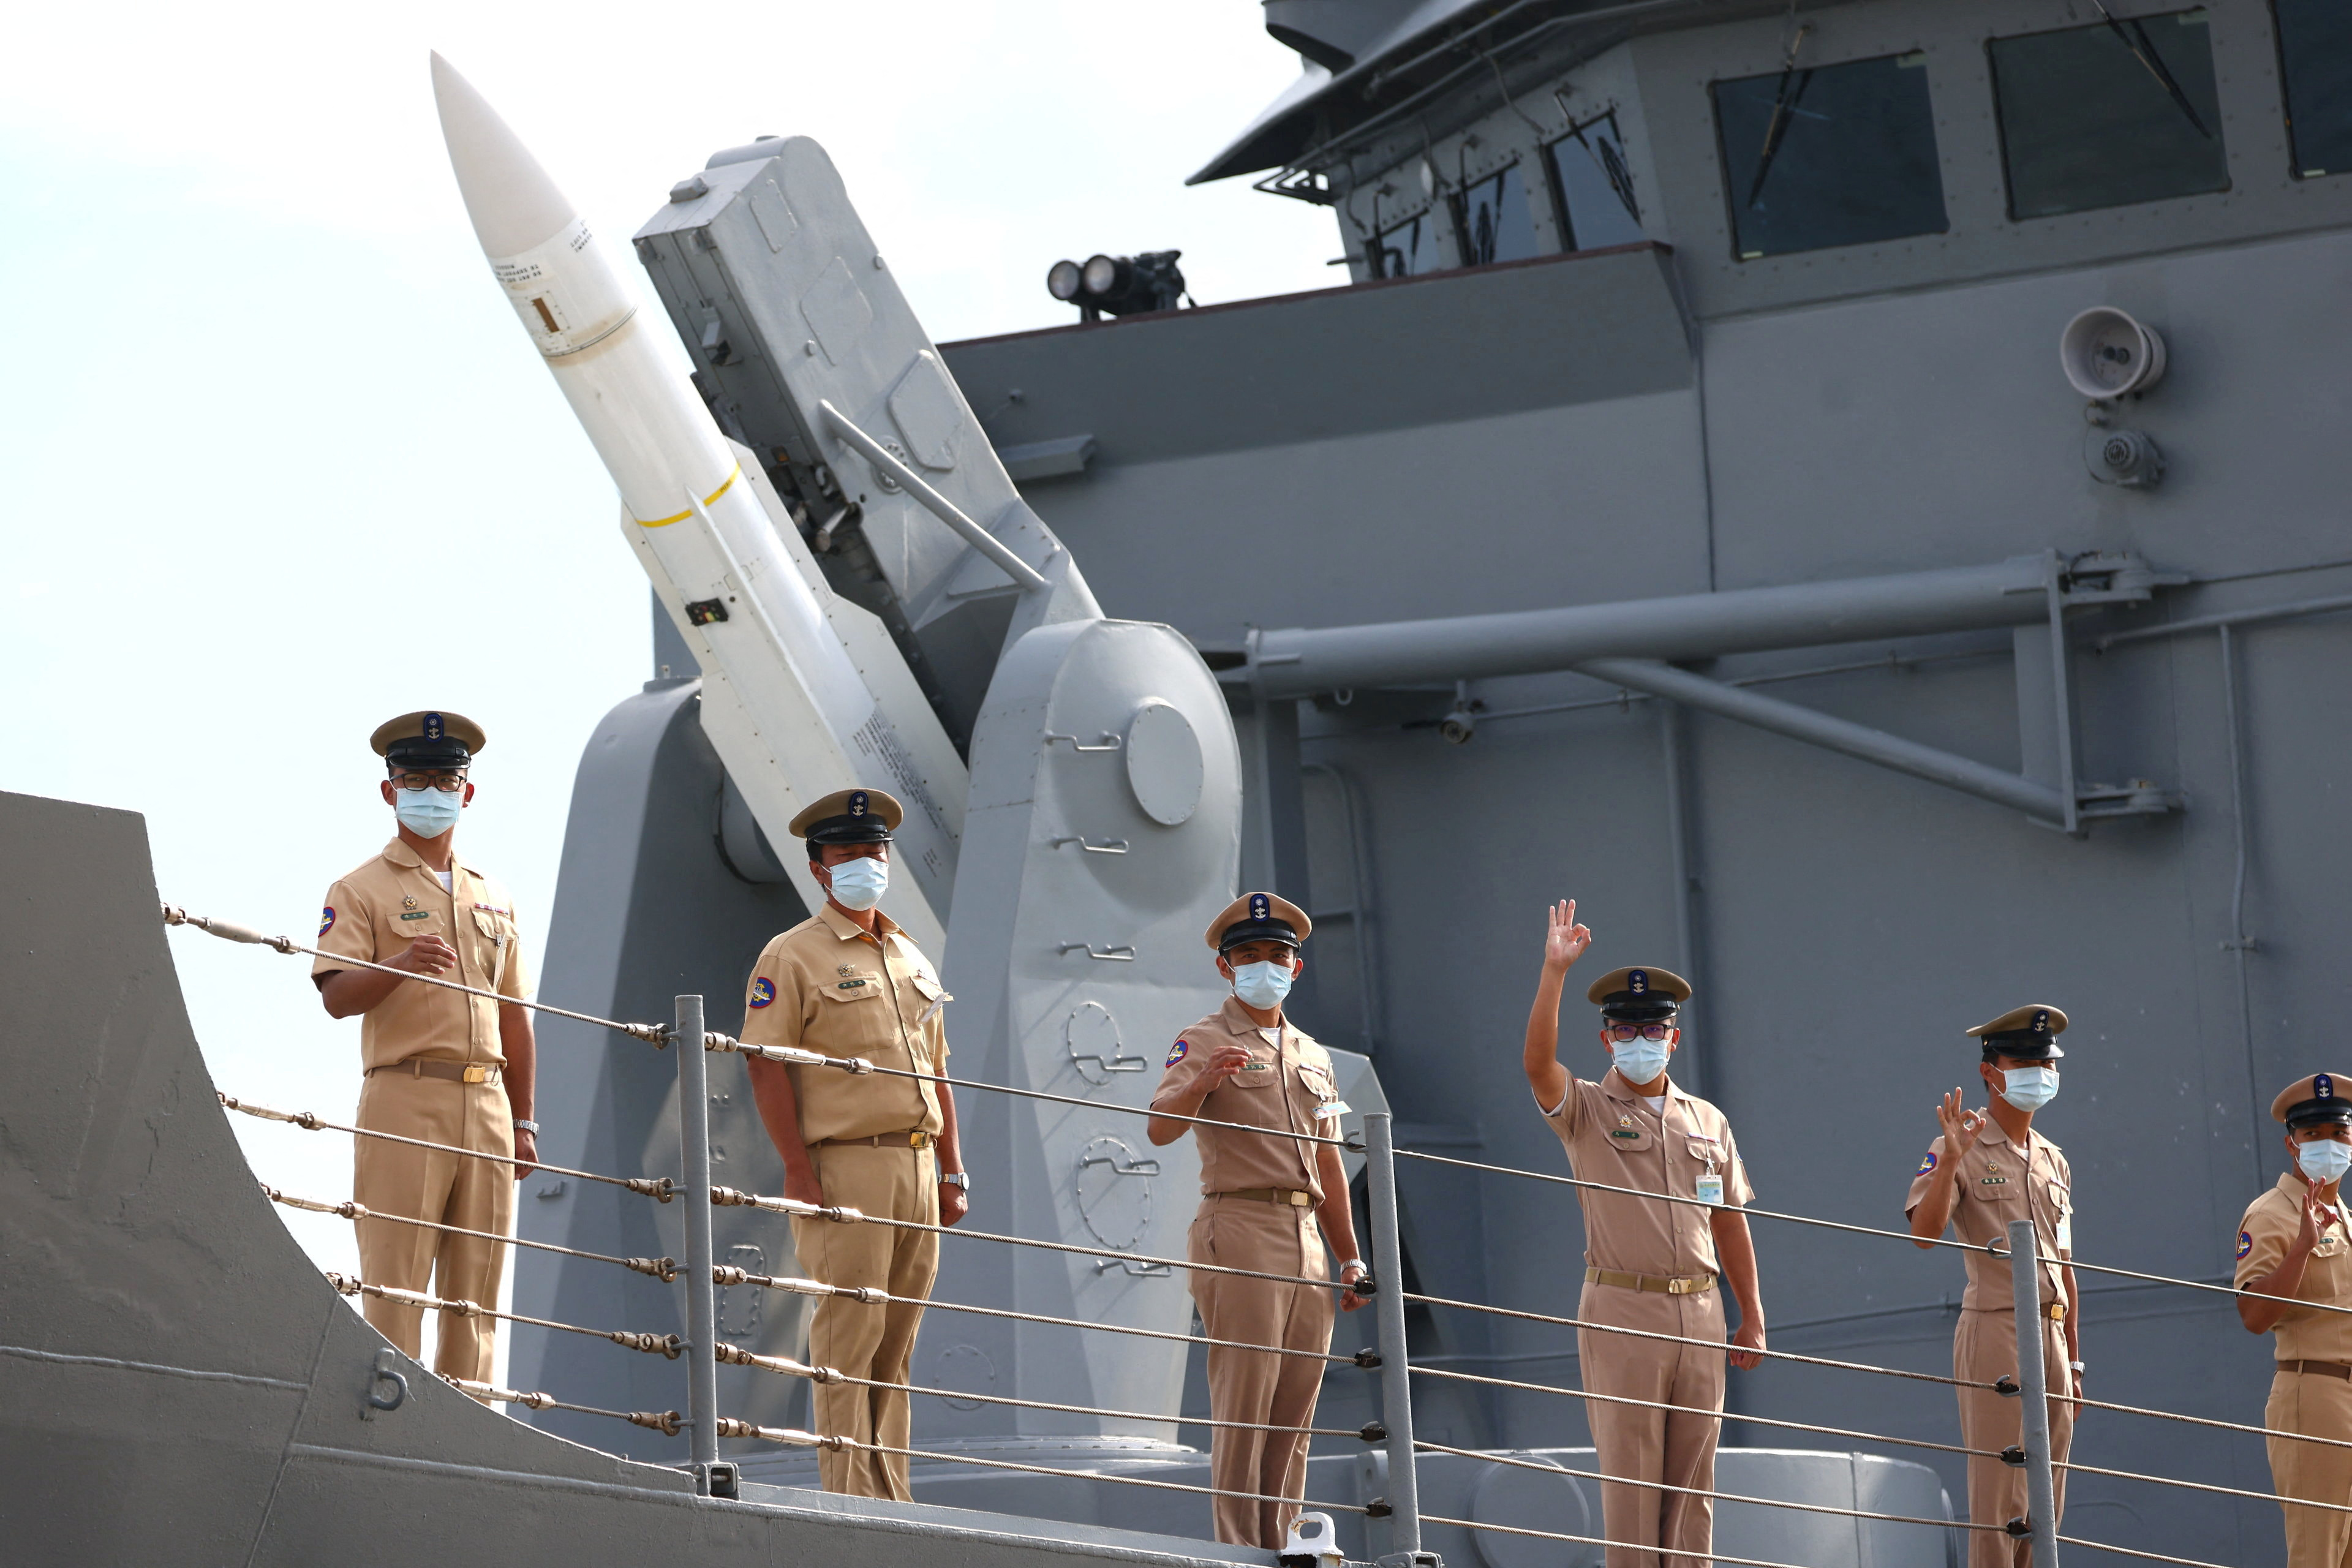 Members of the navy stand in front of a U.S.-made missile on a frigate at a navy base in Penghu Islands